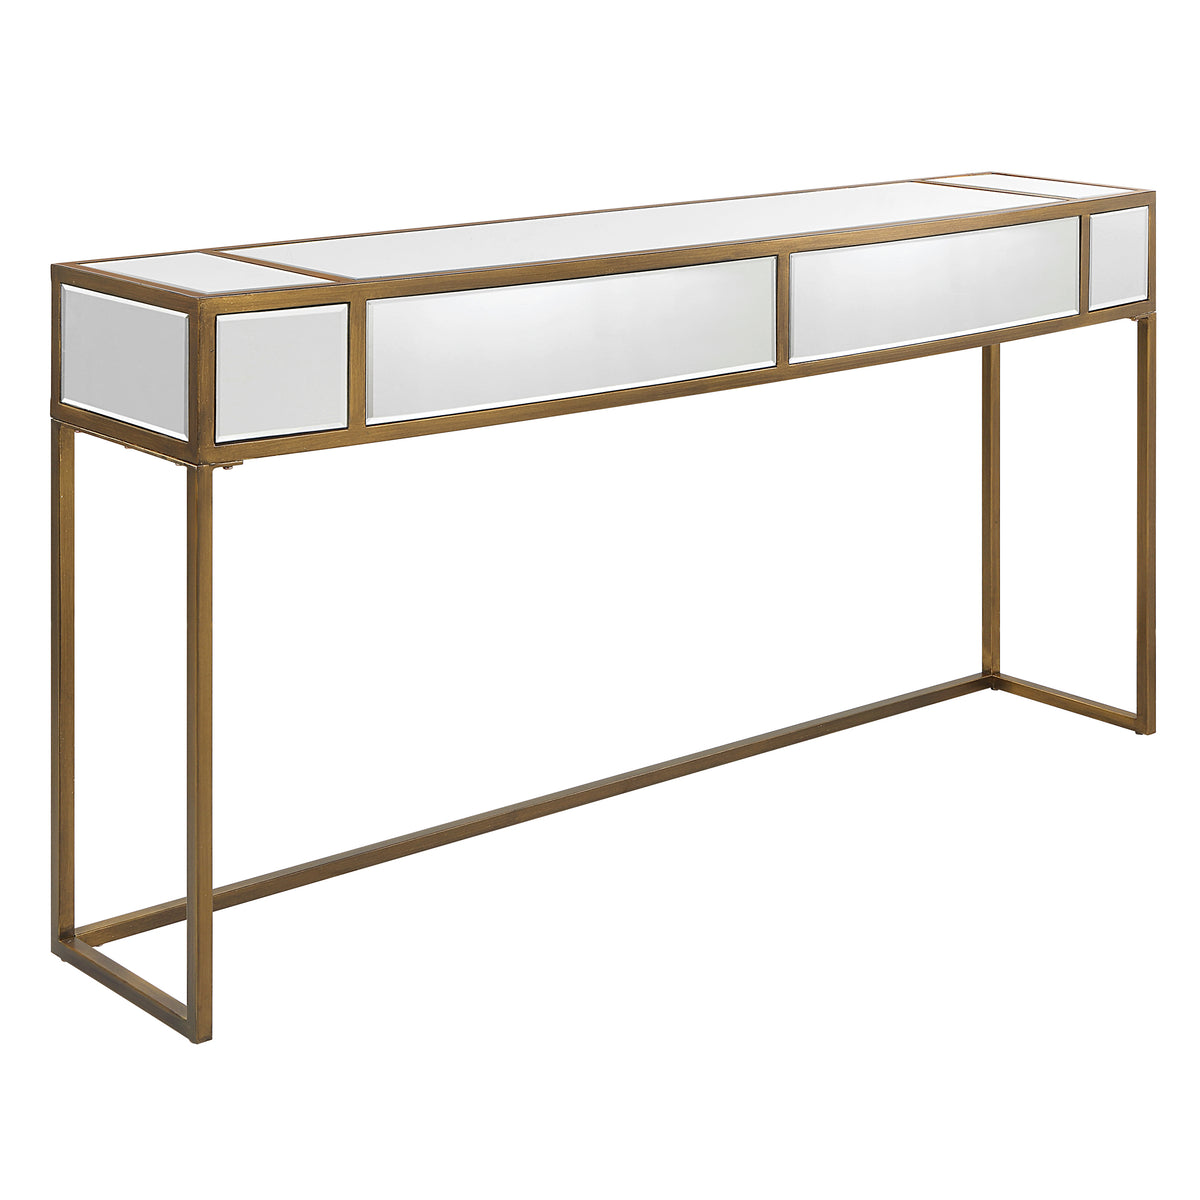 Uttermost Reflect Mirrored Console Table